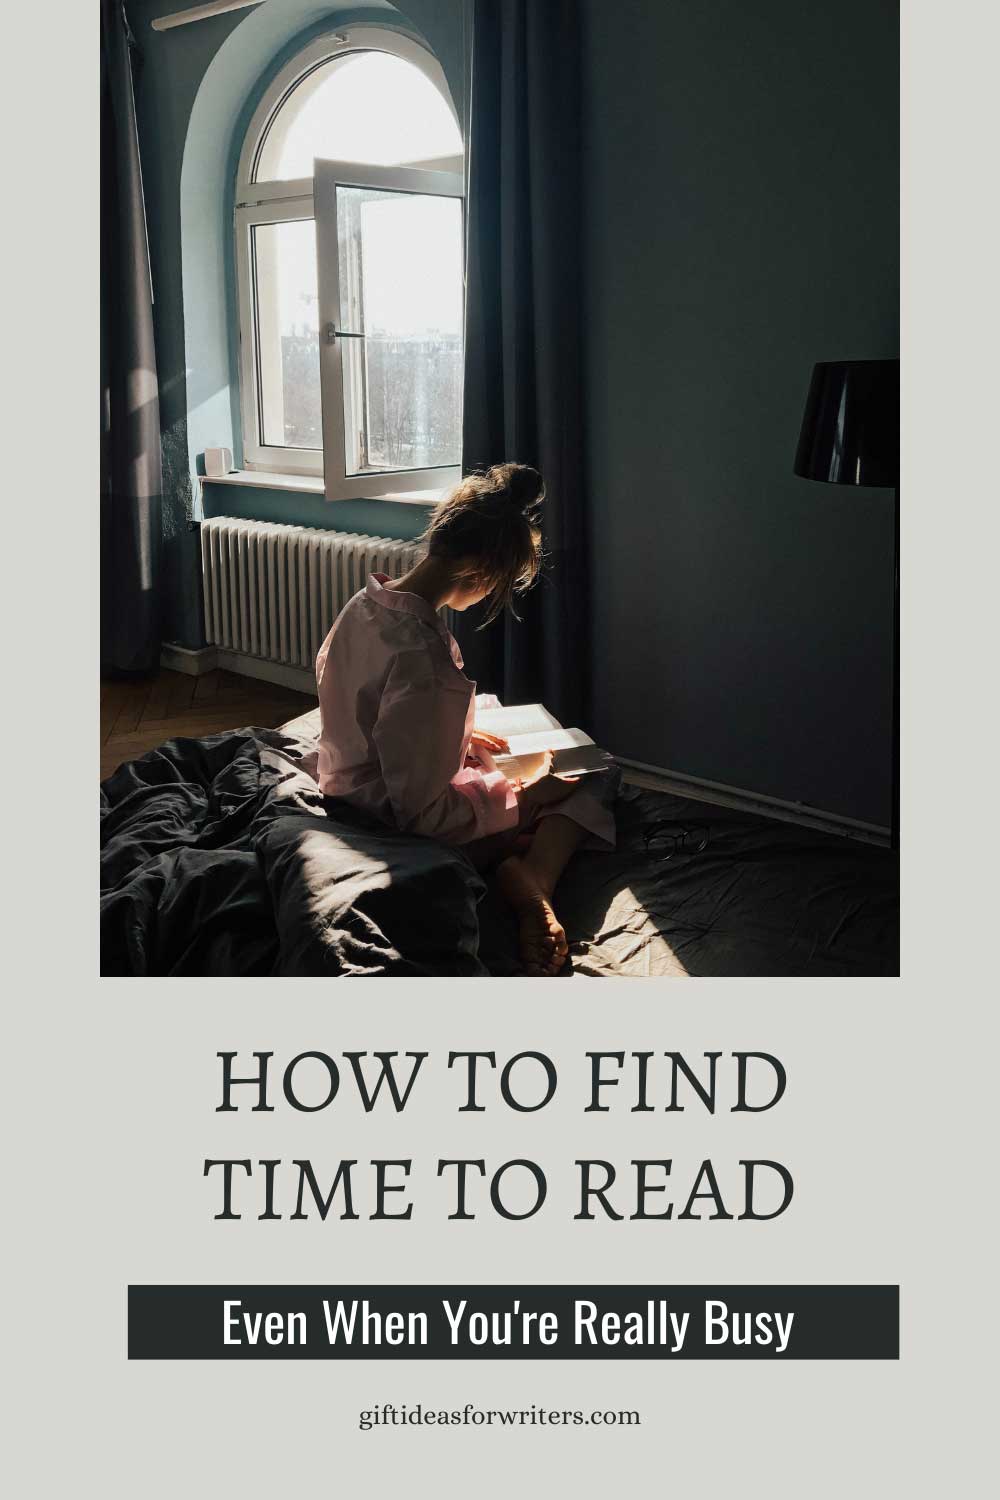 How to Find Time to Read (Even When You’re Busy)